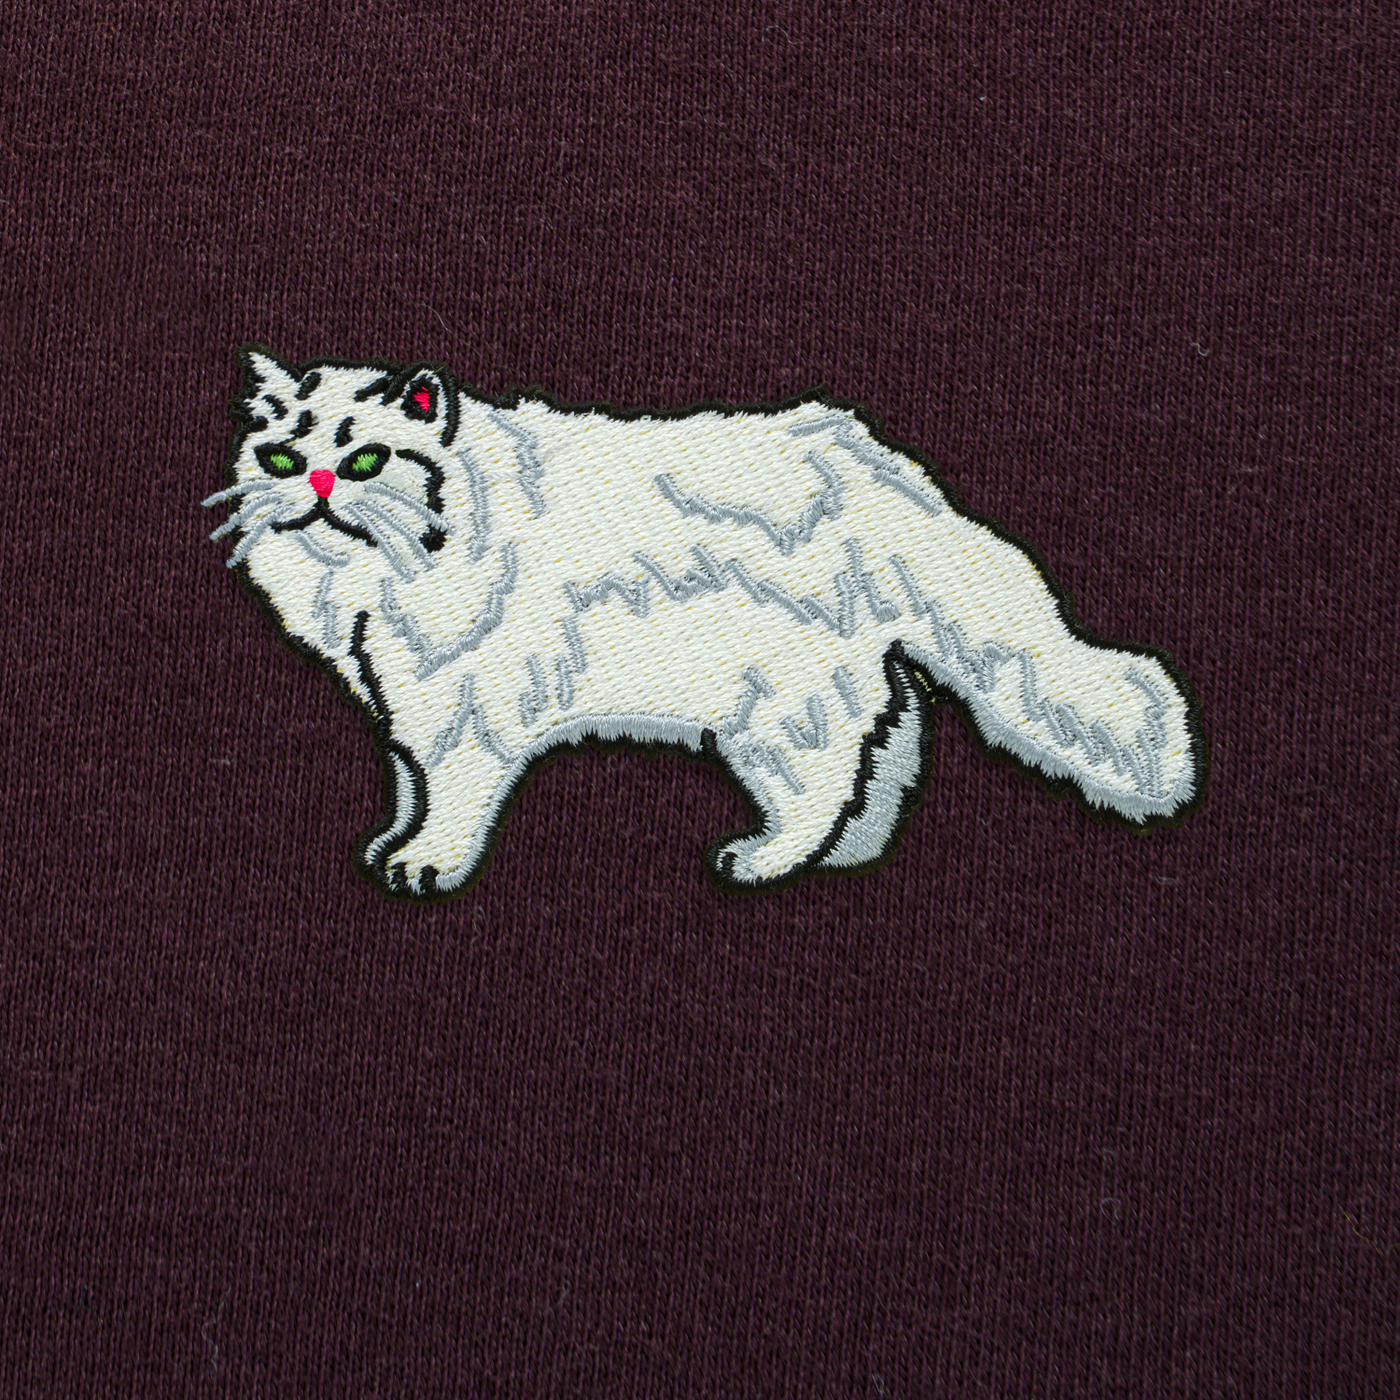 Bobby's Planet Men's Embroidered Persian T-Shirt from Paws Dog Cat Animals Collection in Oxblood Color#color_oxblood